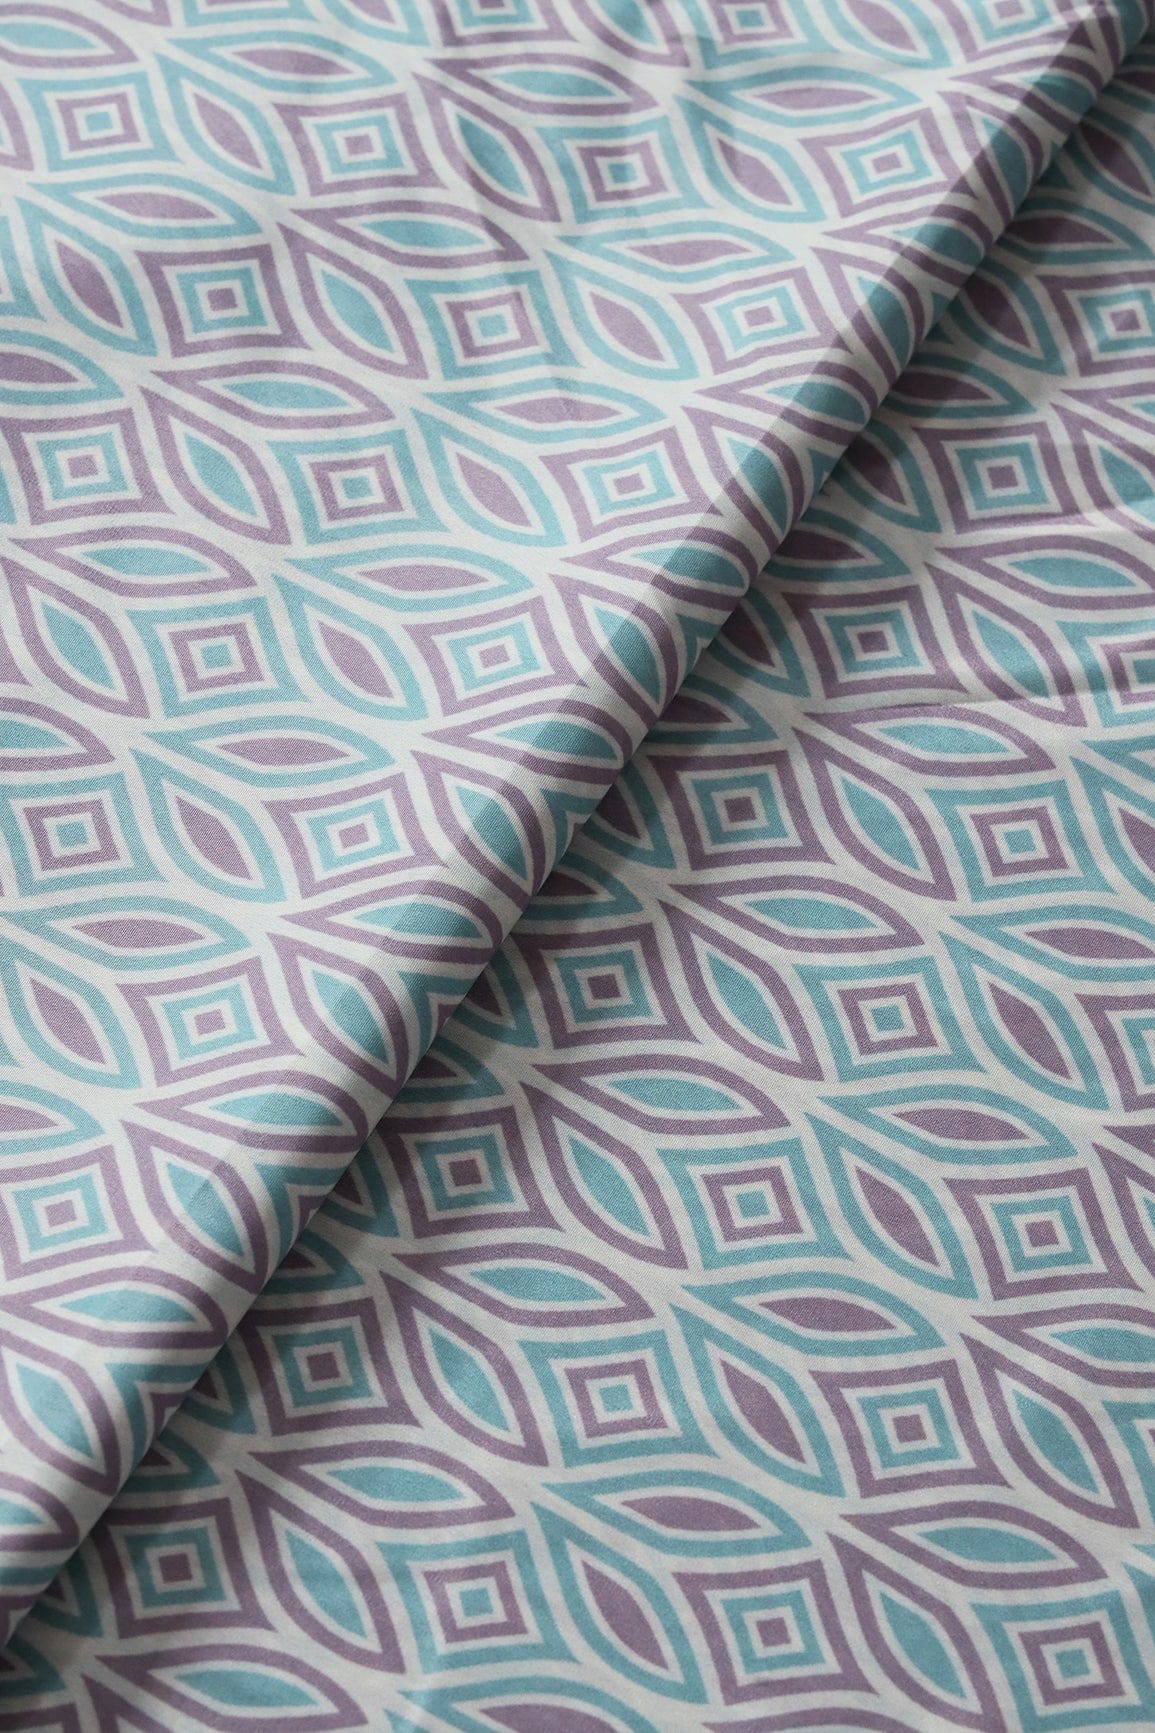 doeraa Prints Pastel Teal And Lavender Geometric Pattern Digital Print On French Crepe Fabric